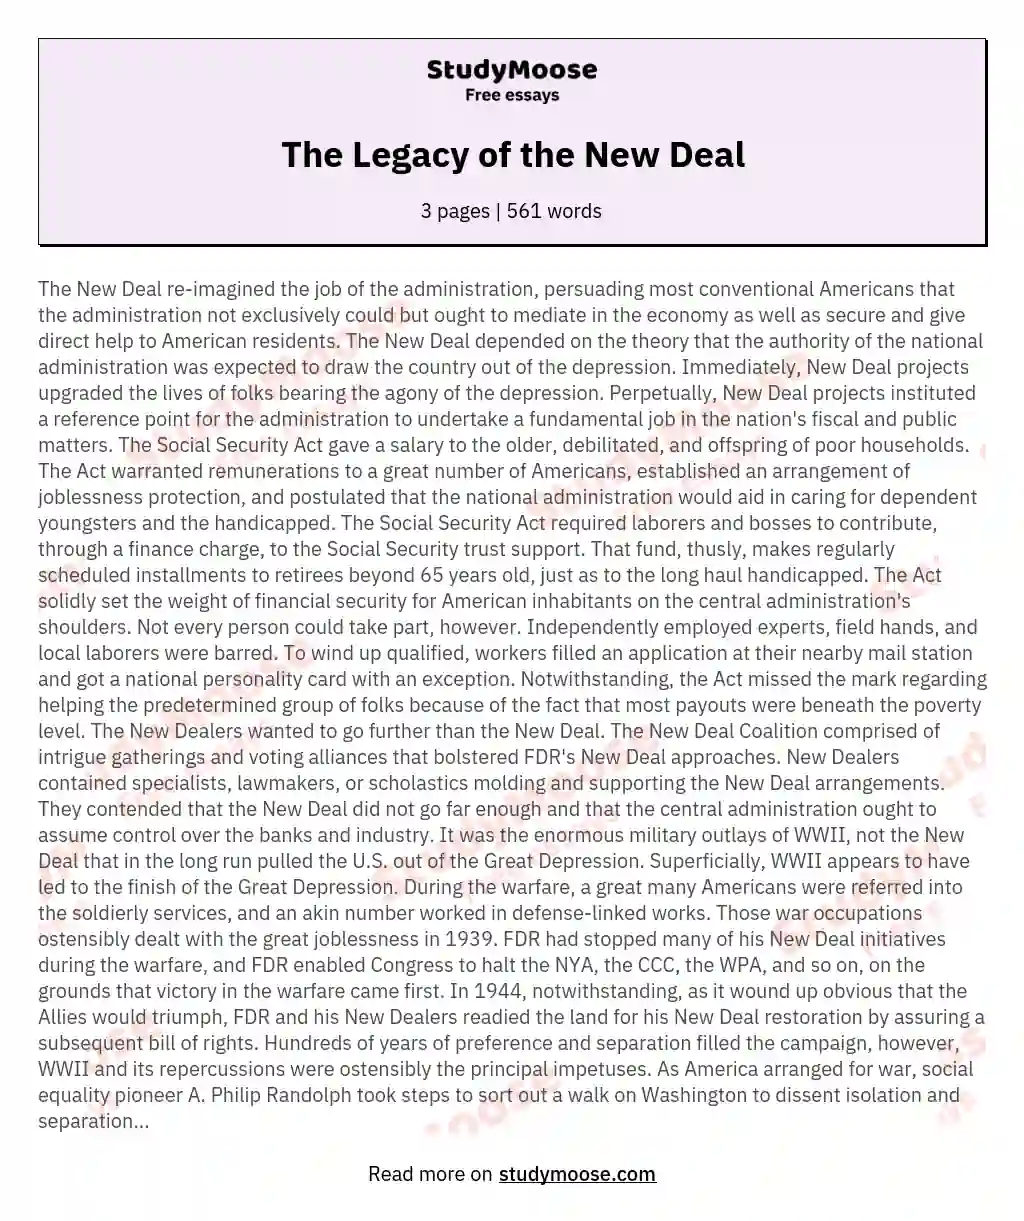 The Legacy of the New Deal essay